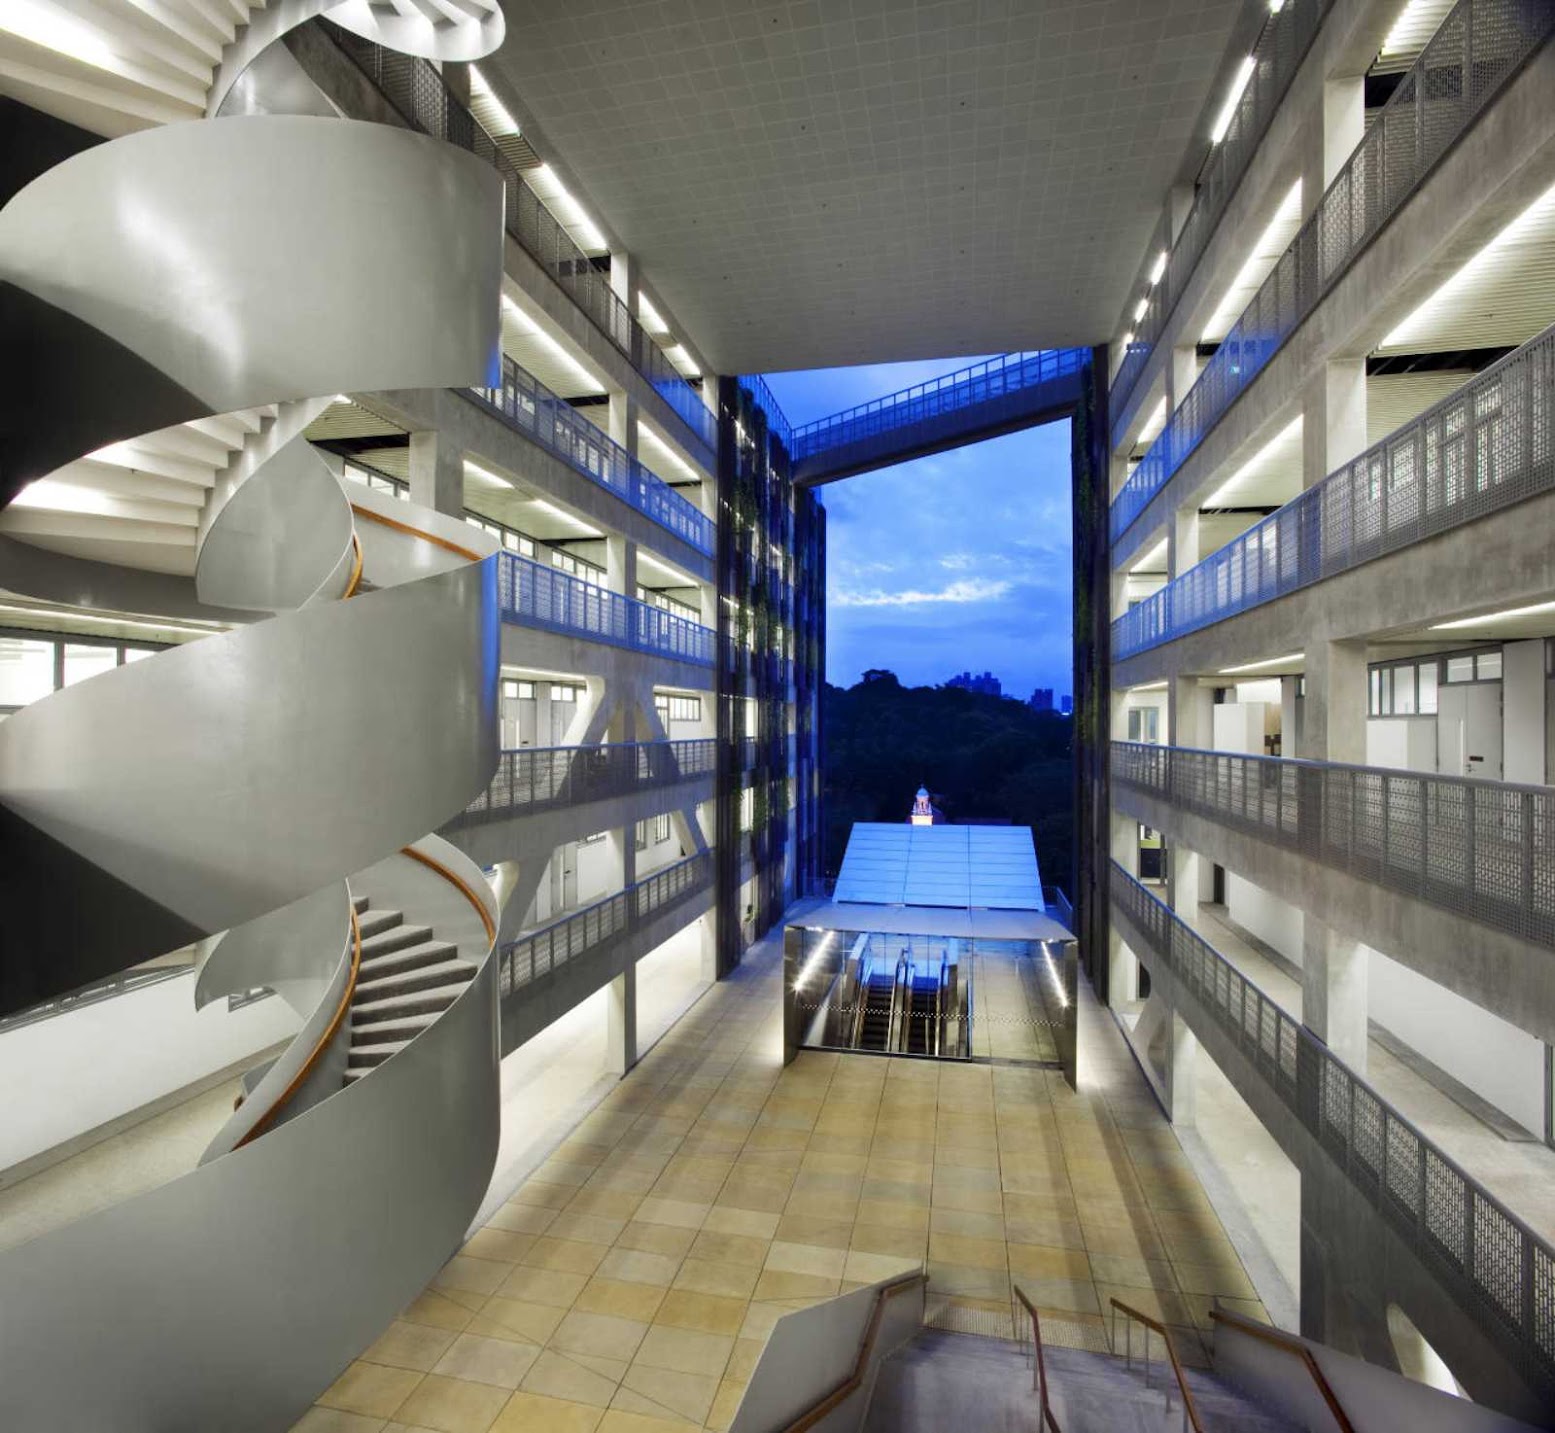 Singapore: [SCHOOL OF THE ARTS BY WOHA]